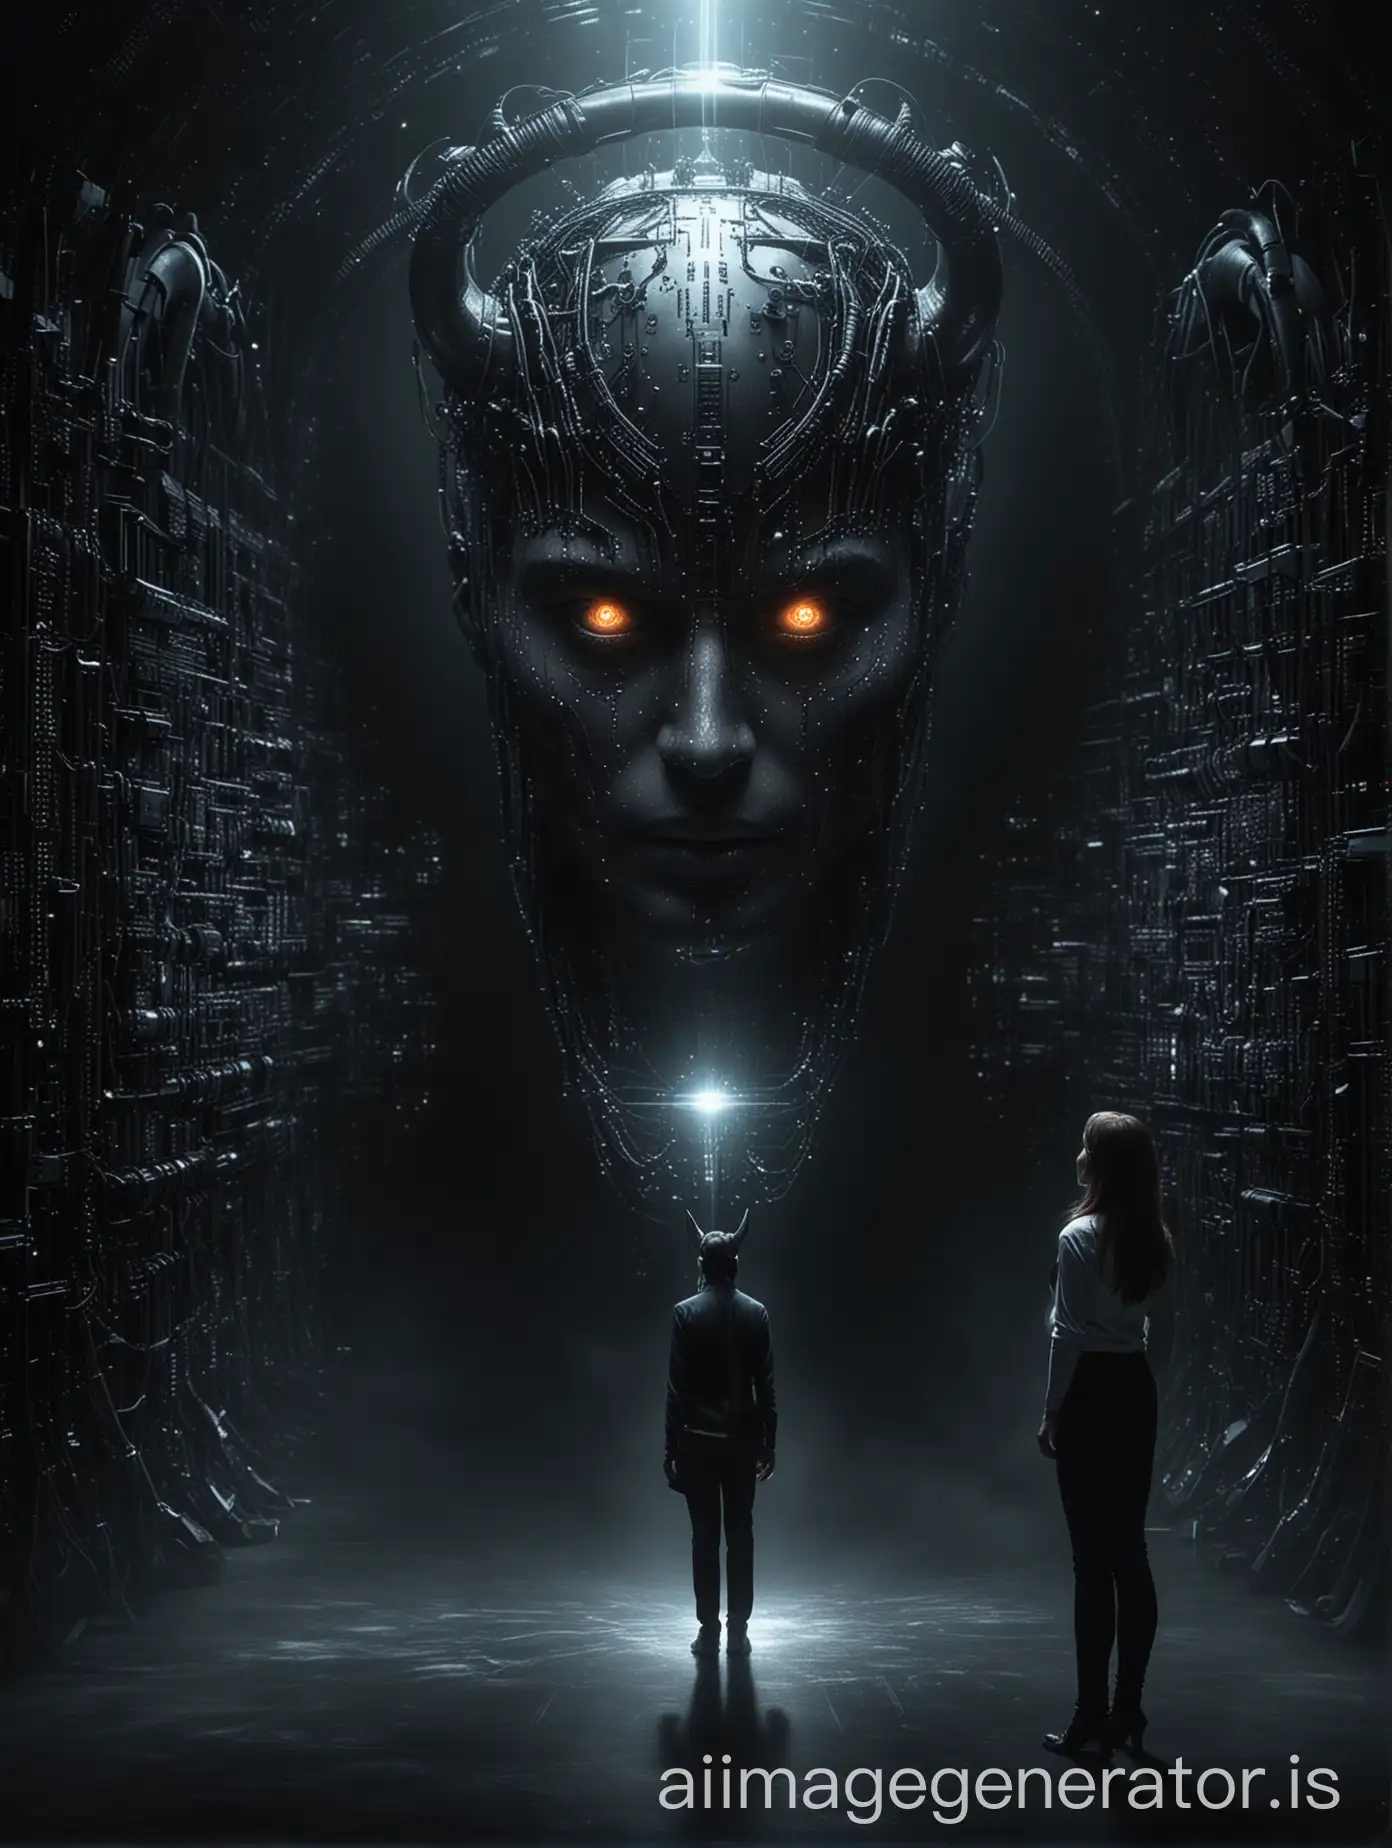 Dark and mysterious image with: a man, a woman and a quantum computer. Including more than one human, in the darkness. Add in a pair of horns separate to the two humans.